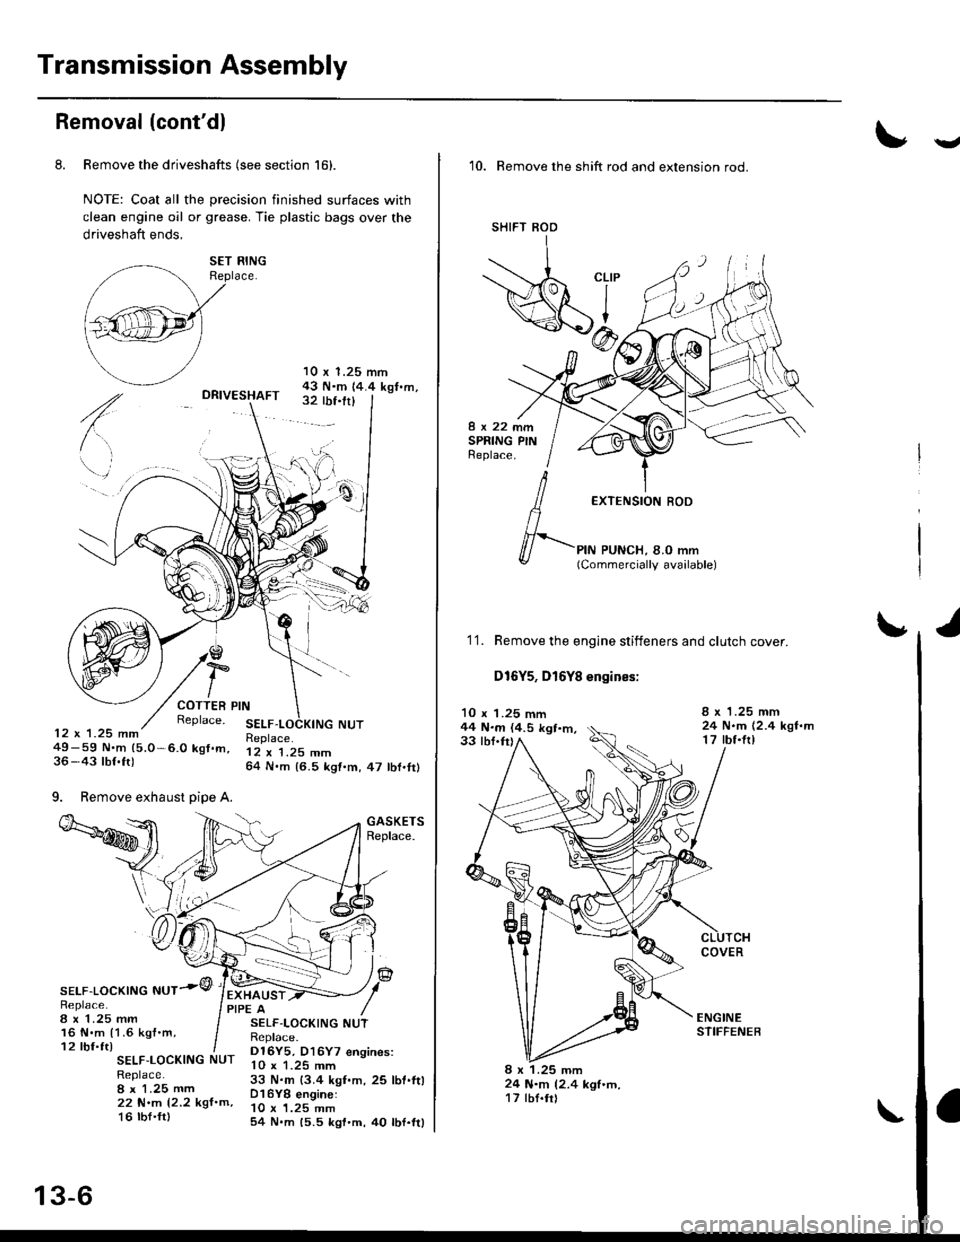 HONDA CIVIC 2000 6.G Owners Manual Transmission Assembly
Removal (contdl
8. Remove the driveshafts (see section 161.
NOTE: Coat all the precision finished surfaces with
clean engine oil or grease. Tie plastic bags over the
driveshaft 